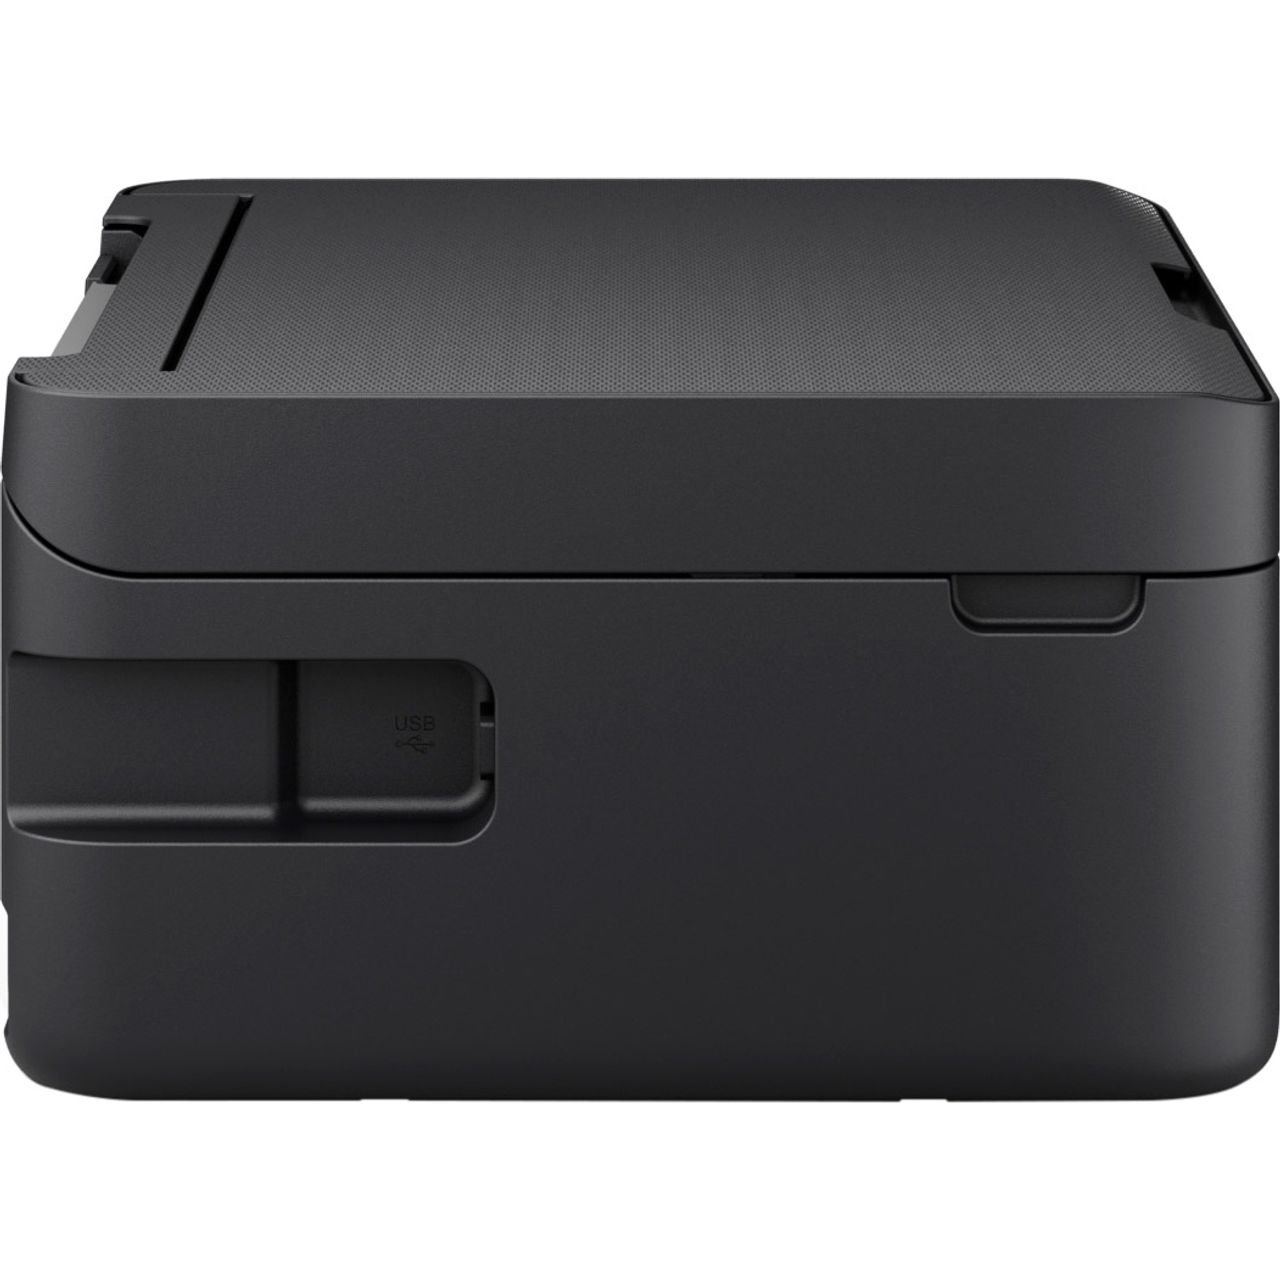 Expression Home XP-3200, Consumer, Inkjet Printers